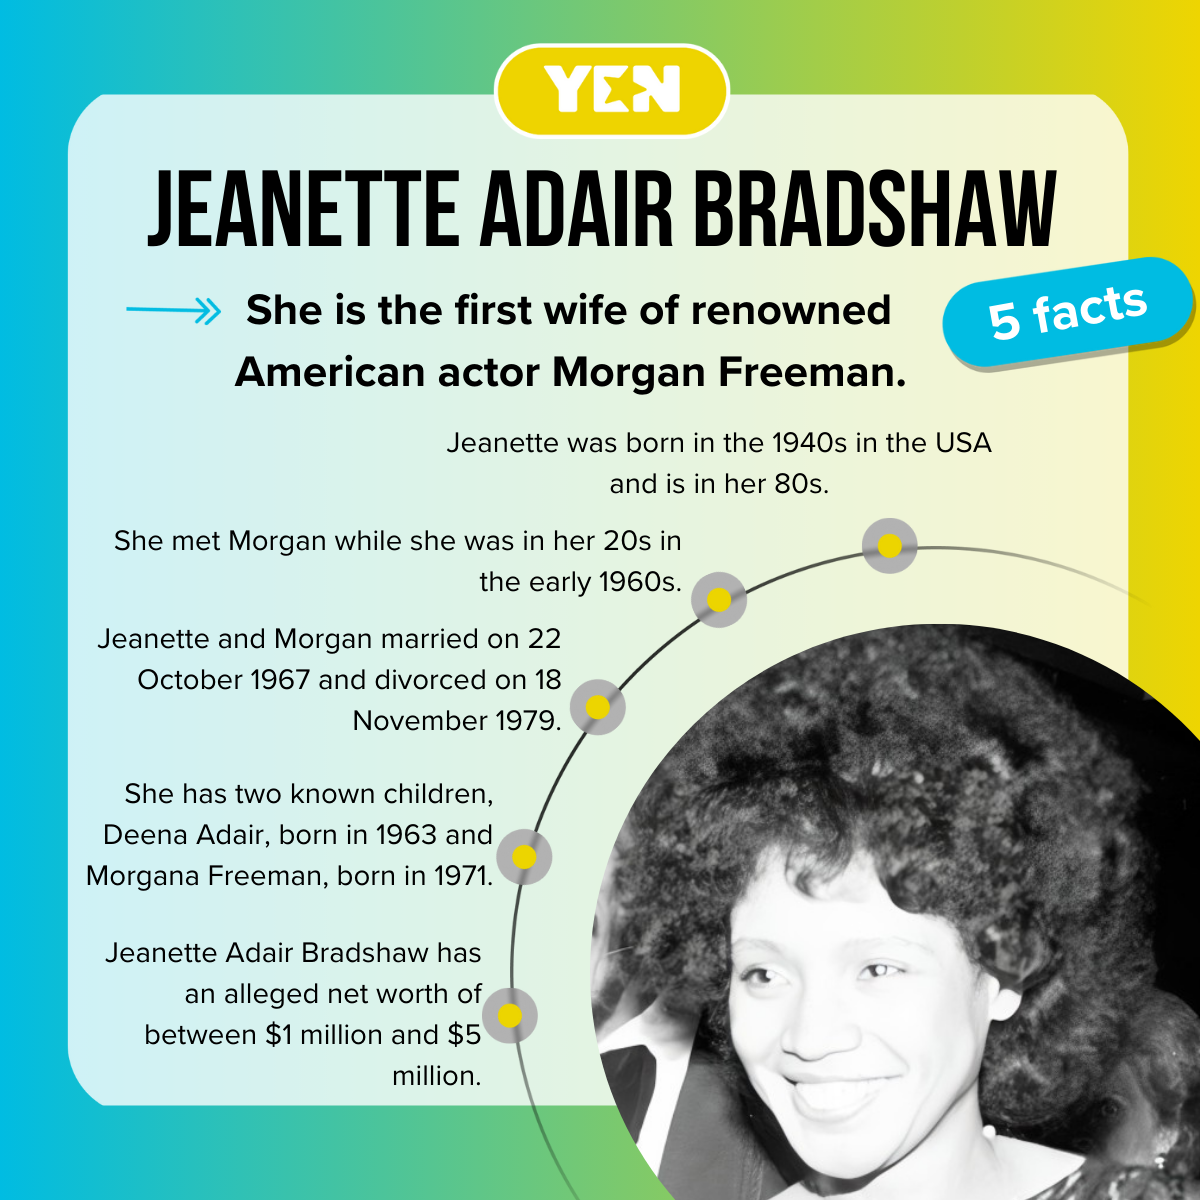 Facts about Jeanette Adair Bradshaw.